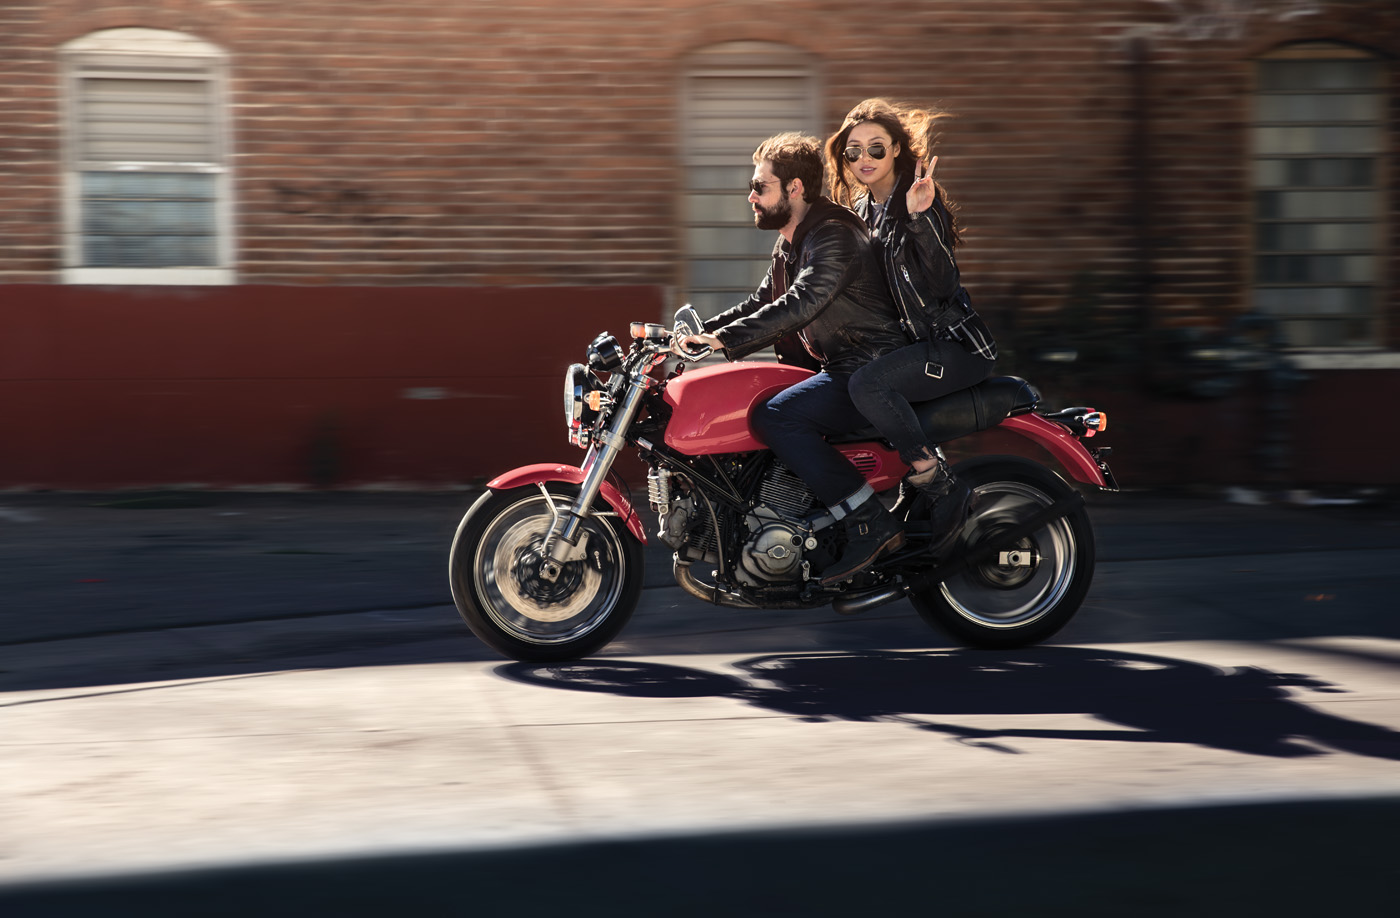 A man drives a red motorcycle while a woman sits behind him and throws up a peace sign.